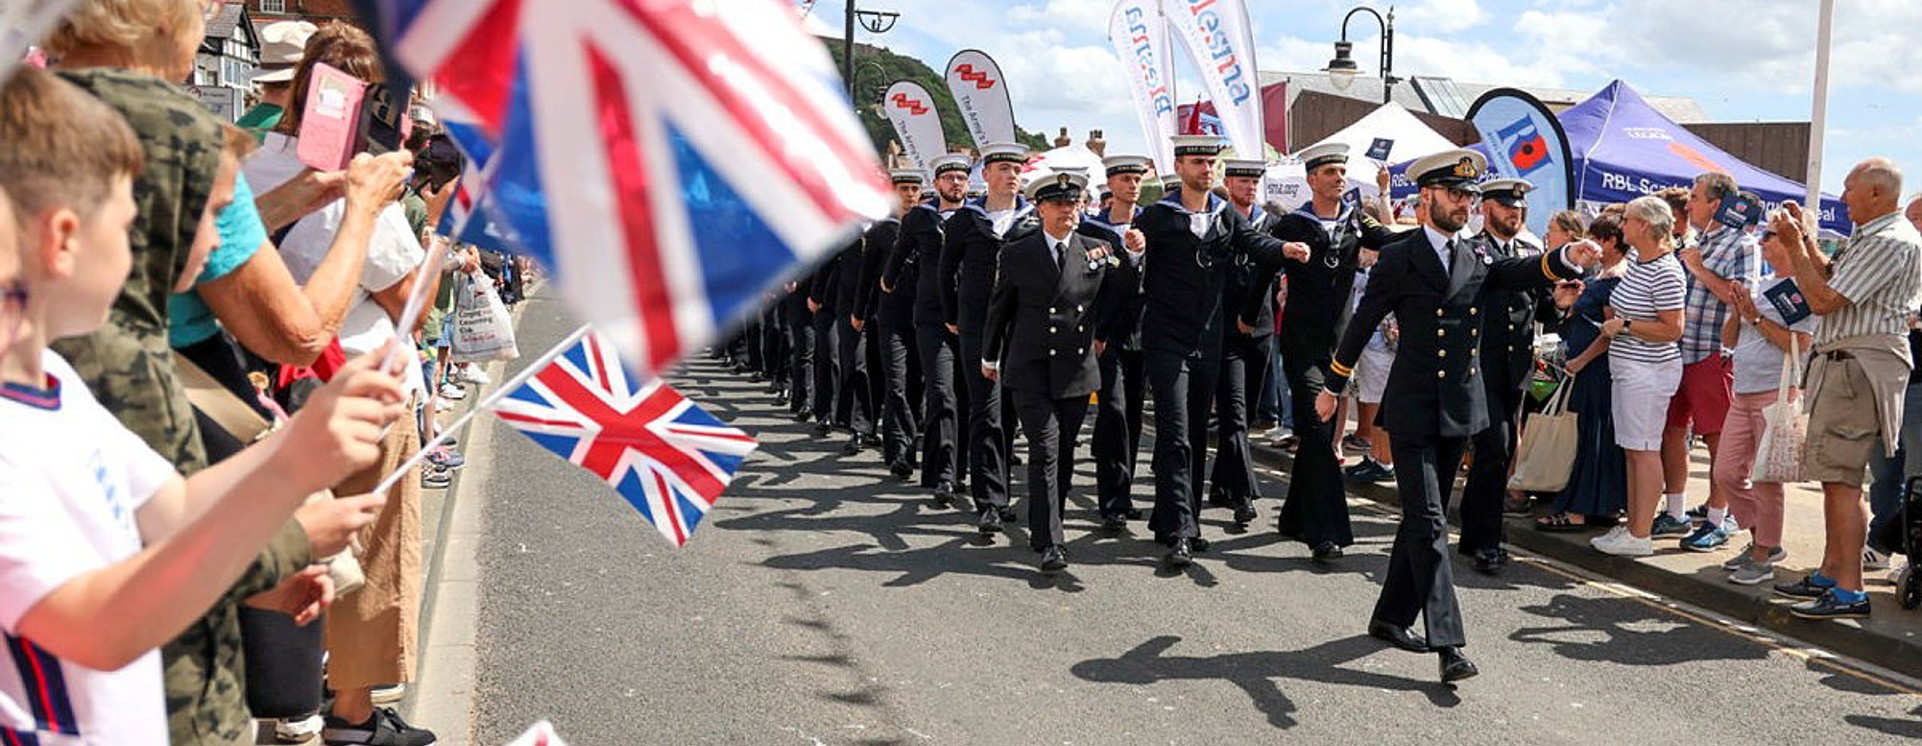 Military personnel parade on Armed Forces Day in UK